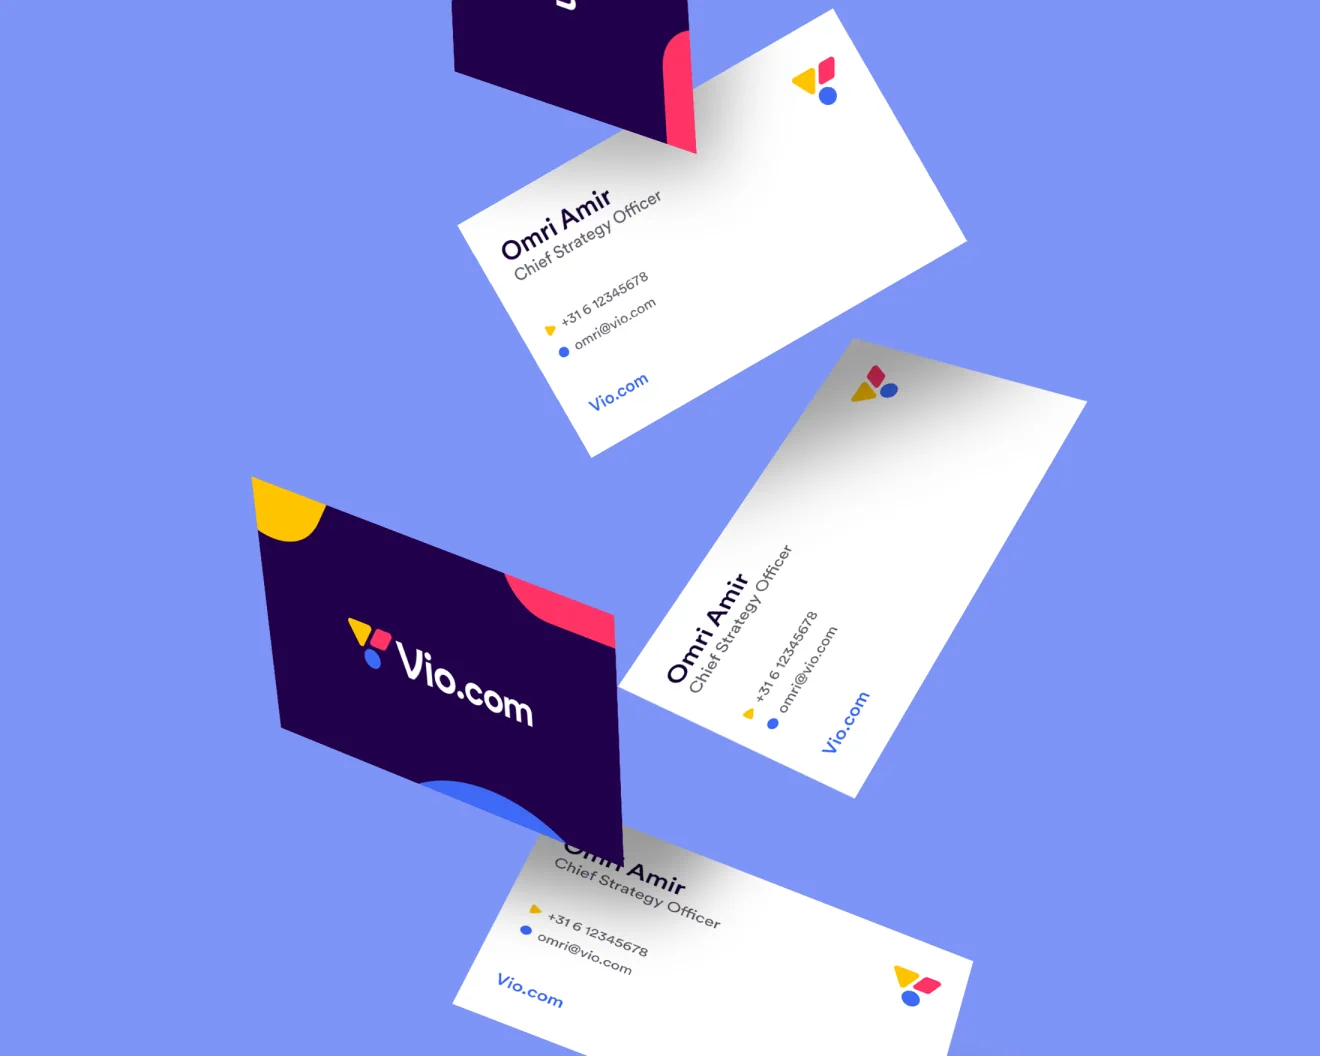 Five business cards playfully shown, looking like they are falling down. The business cards contrast with the light blue background behind the cards. Some of the business cards show a side that is dark blue side. In the middle of the dark blue background is a white logotype that says Vio.com. The logotype is accompanied by a logo mark consisting of three colored shapes. The other business cards show details of a person amongst which their name, email and phone number.